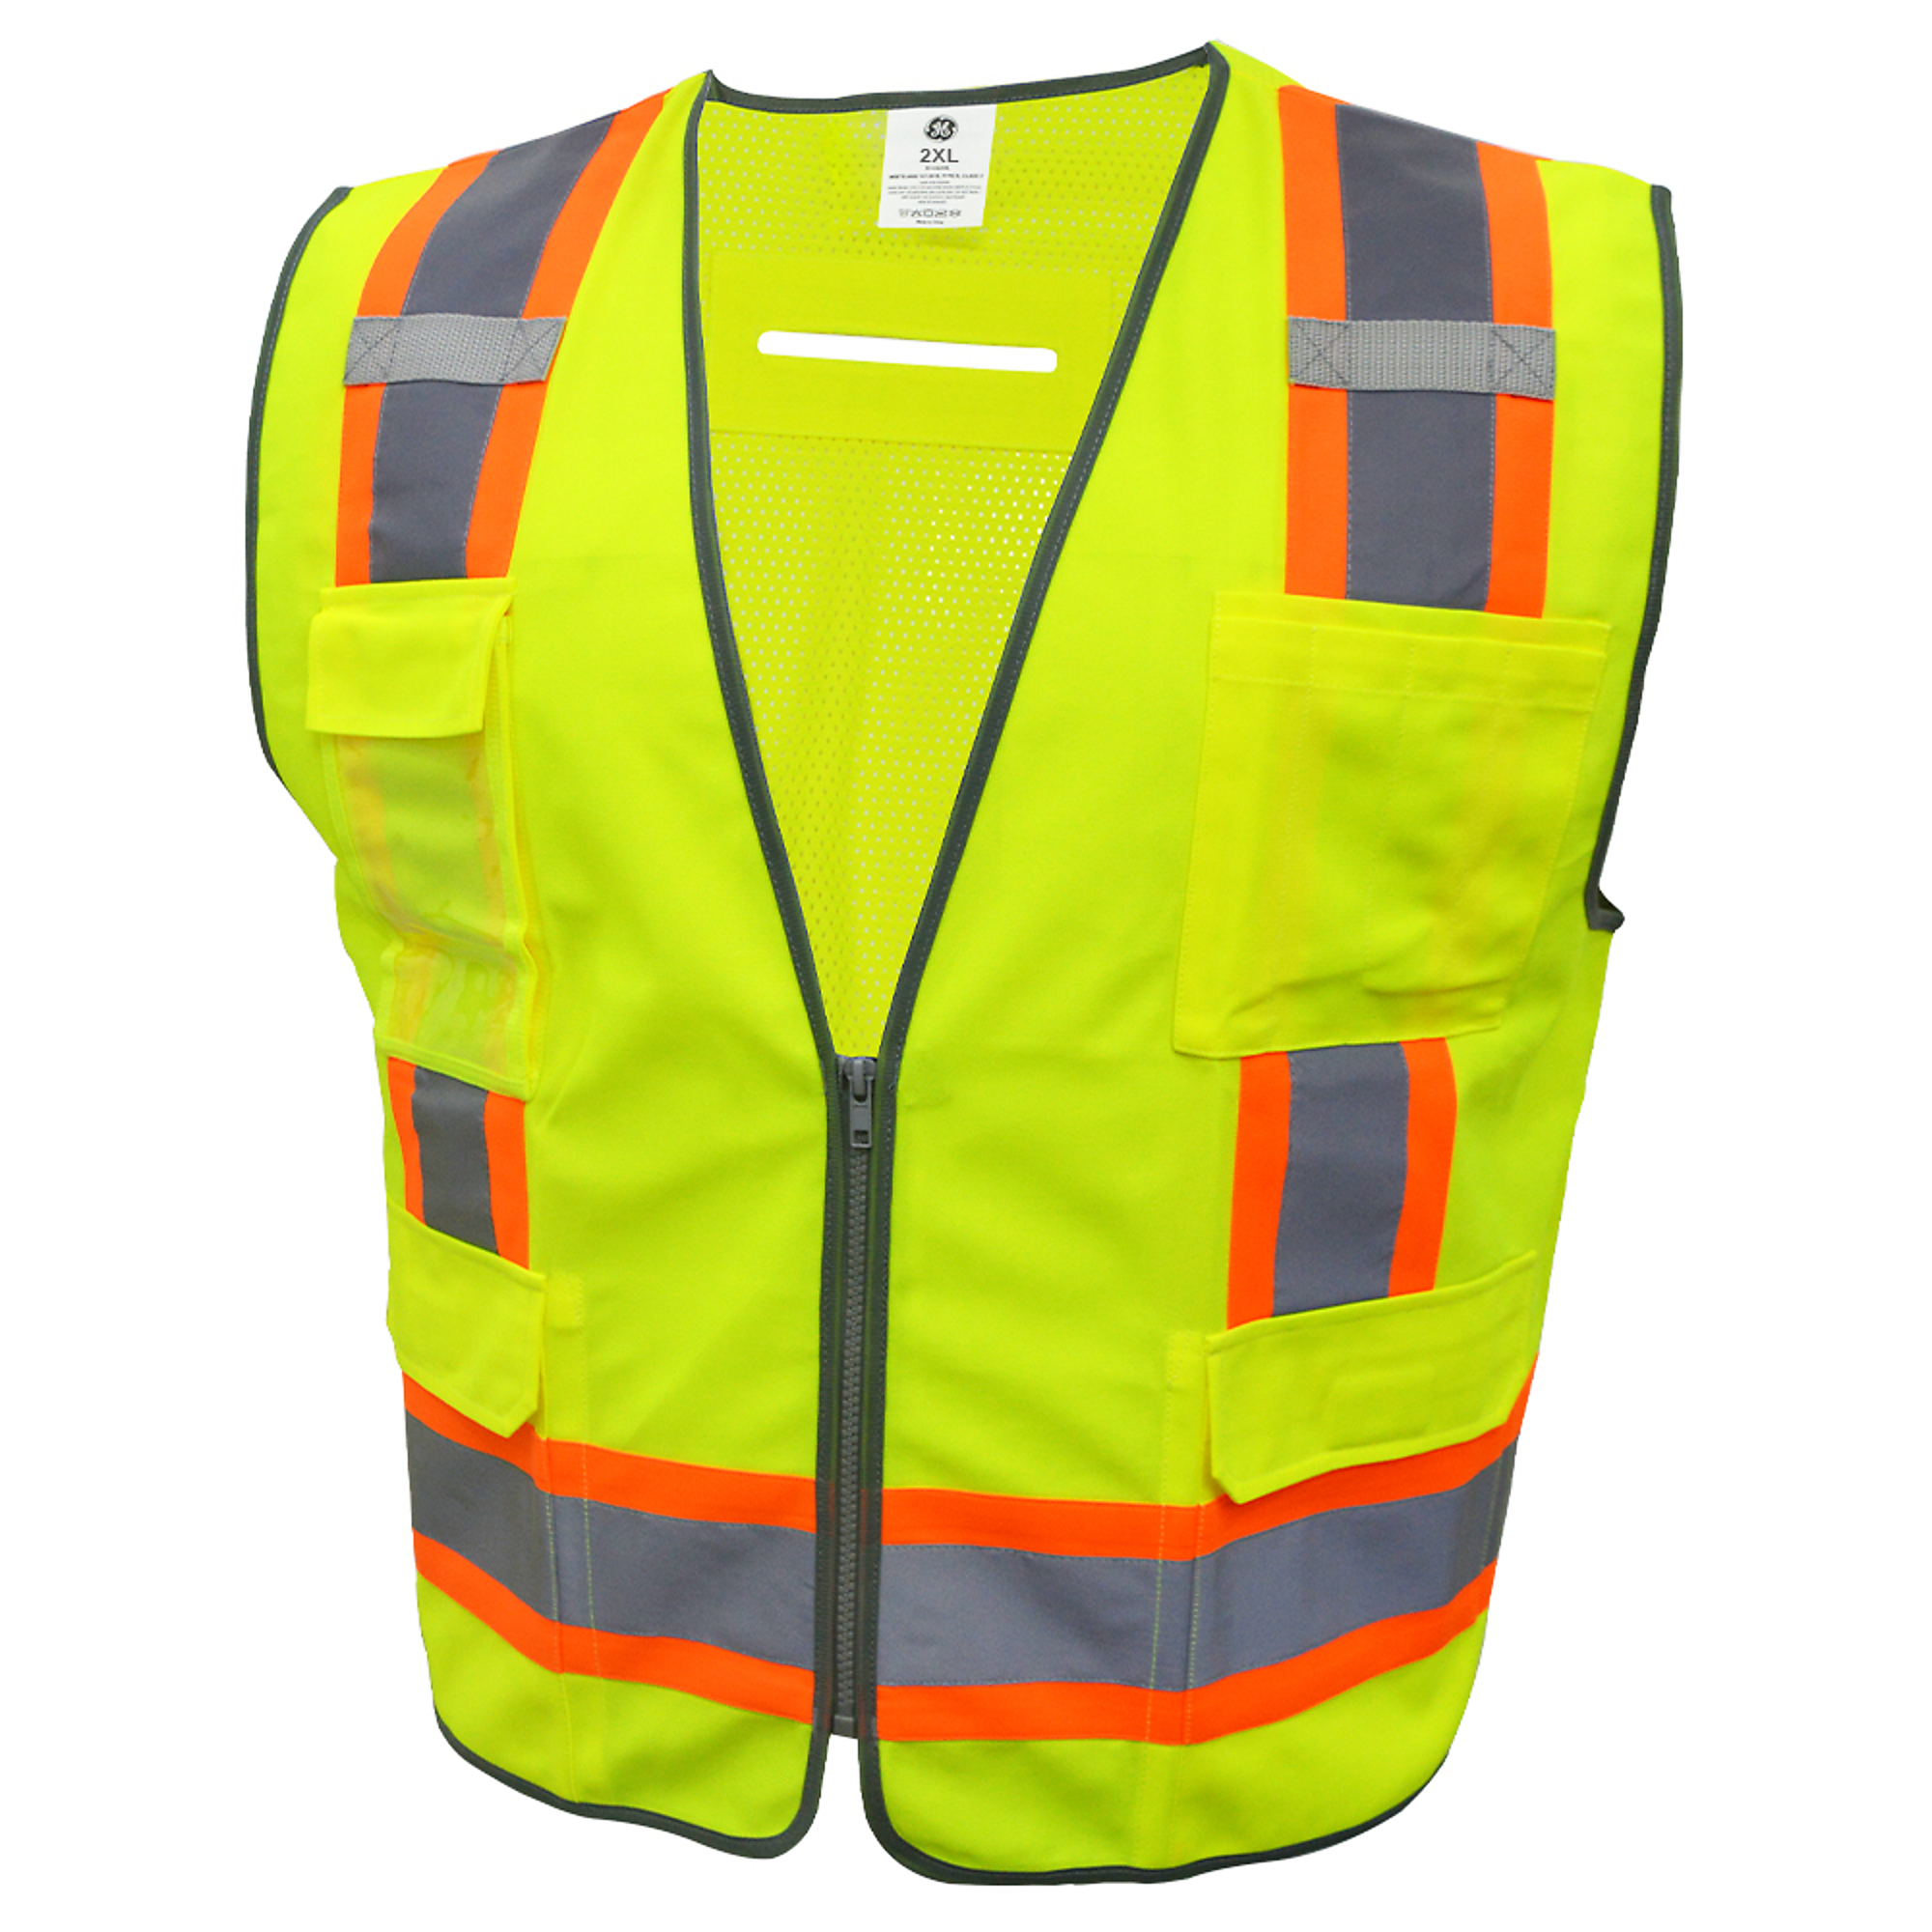 General Electric, Safety Vest w Contrasting Trims 8 Pockets 2XL, Size 2XL, Color GREEN, Model GV082G2XL